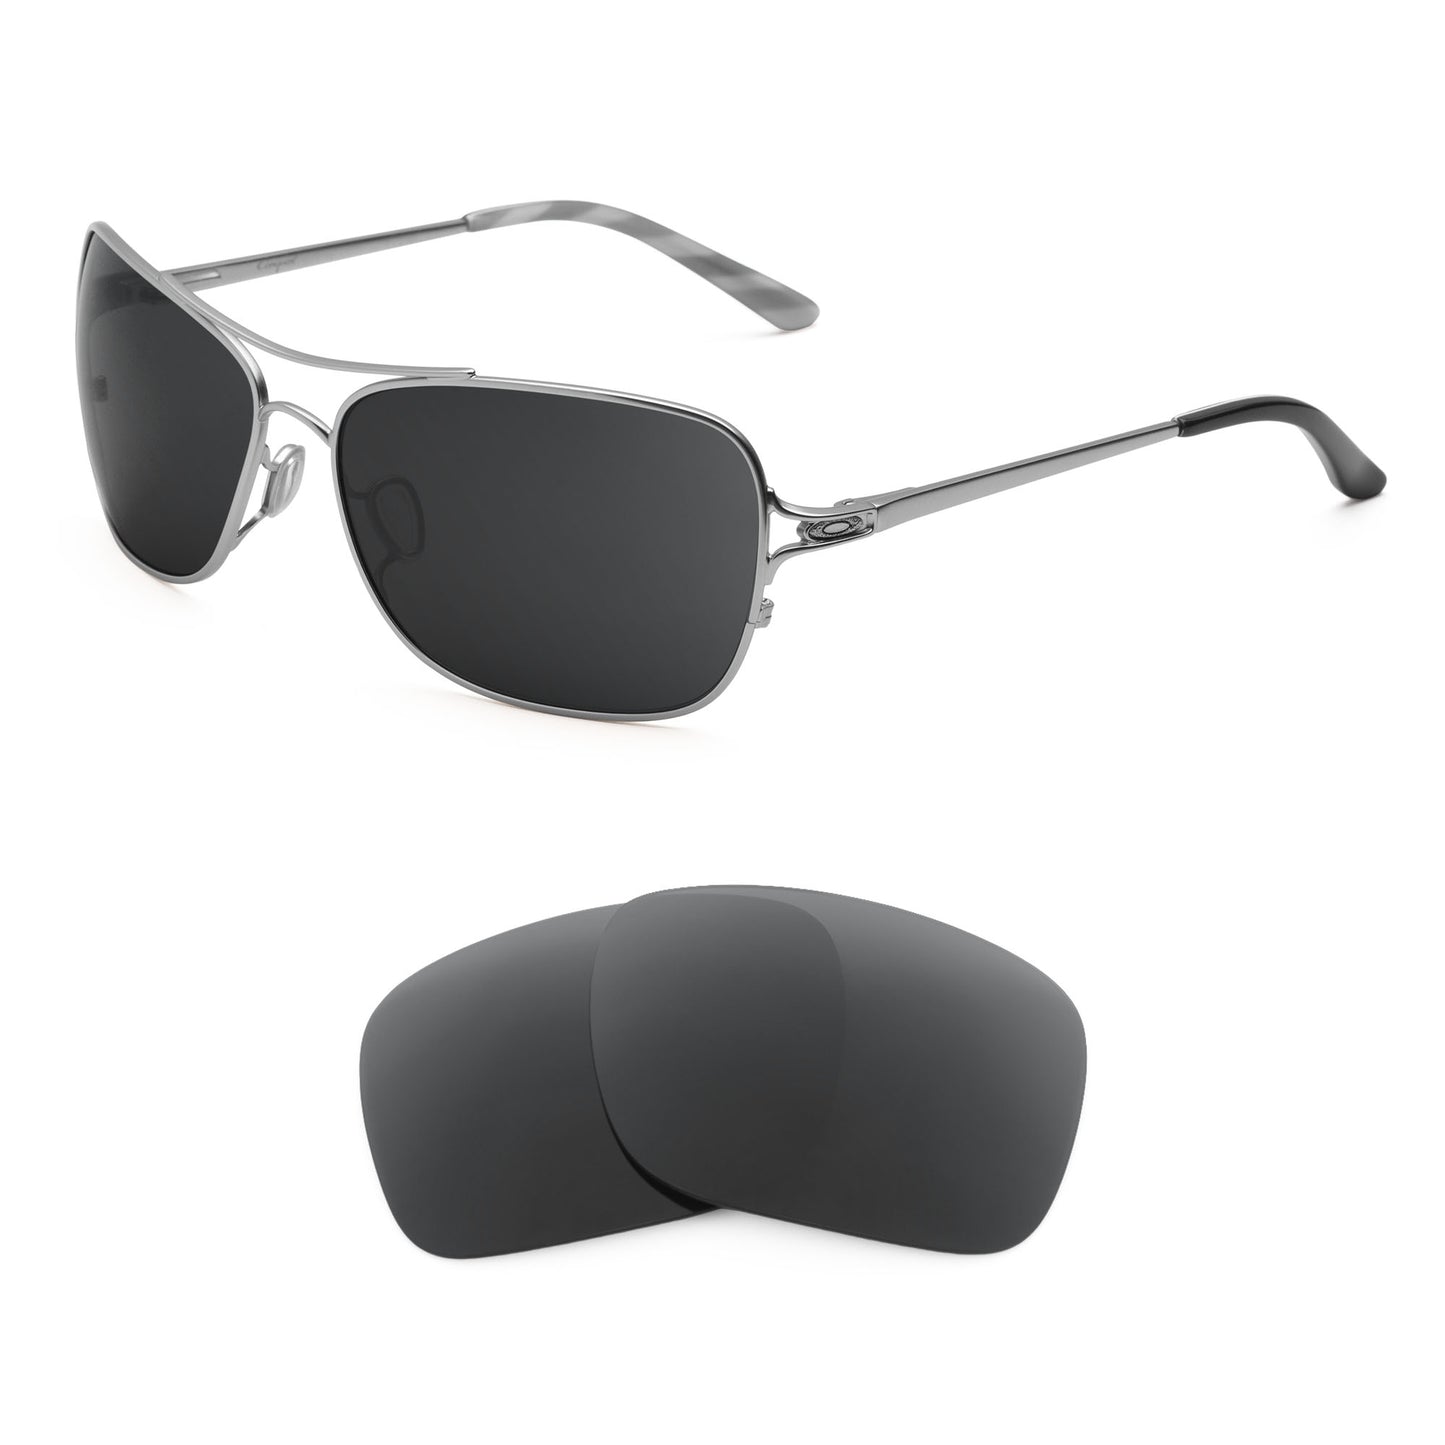 Oakley Conquest sunglasses with replacement lenses